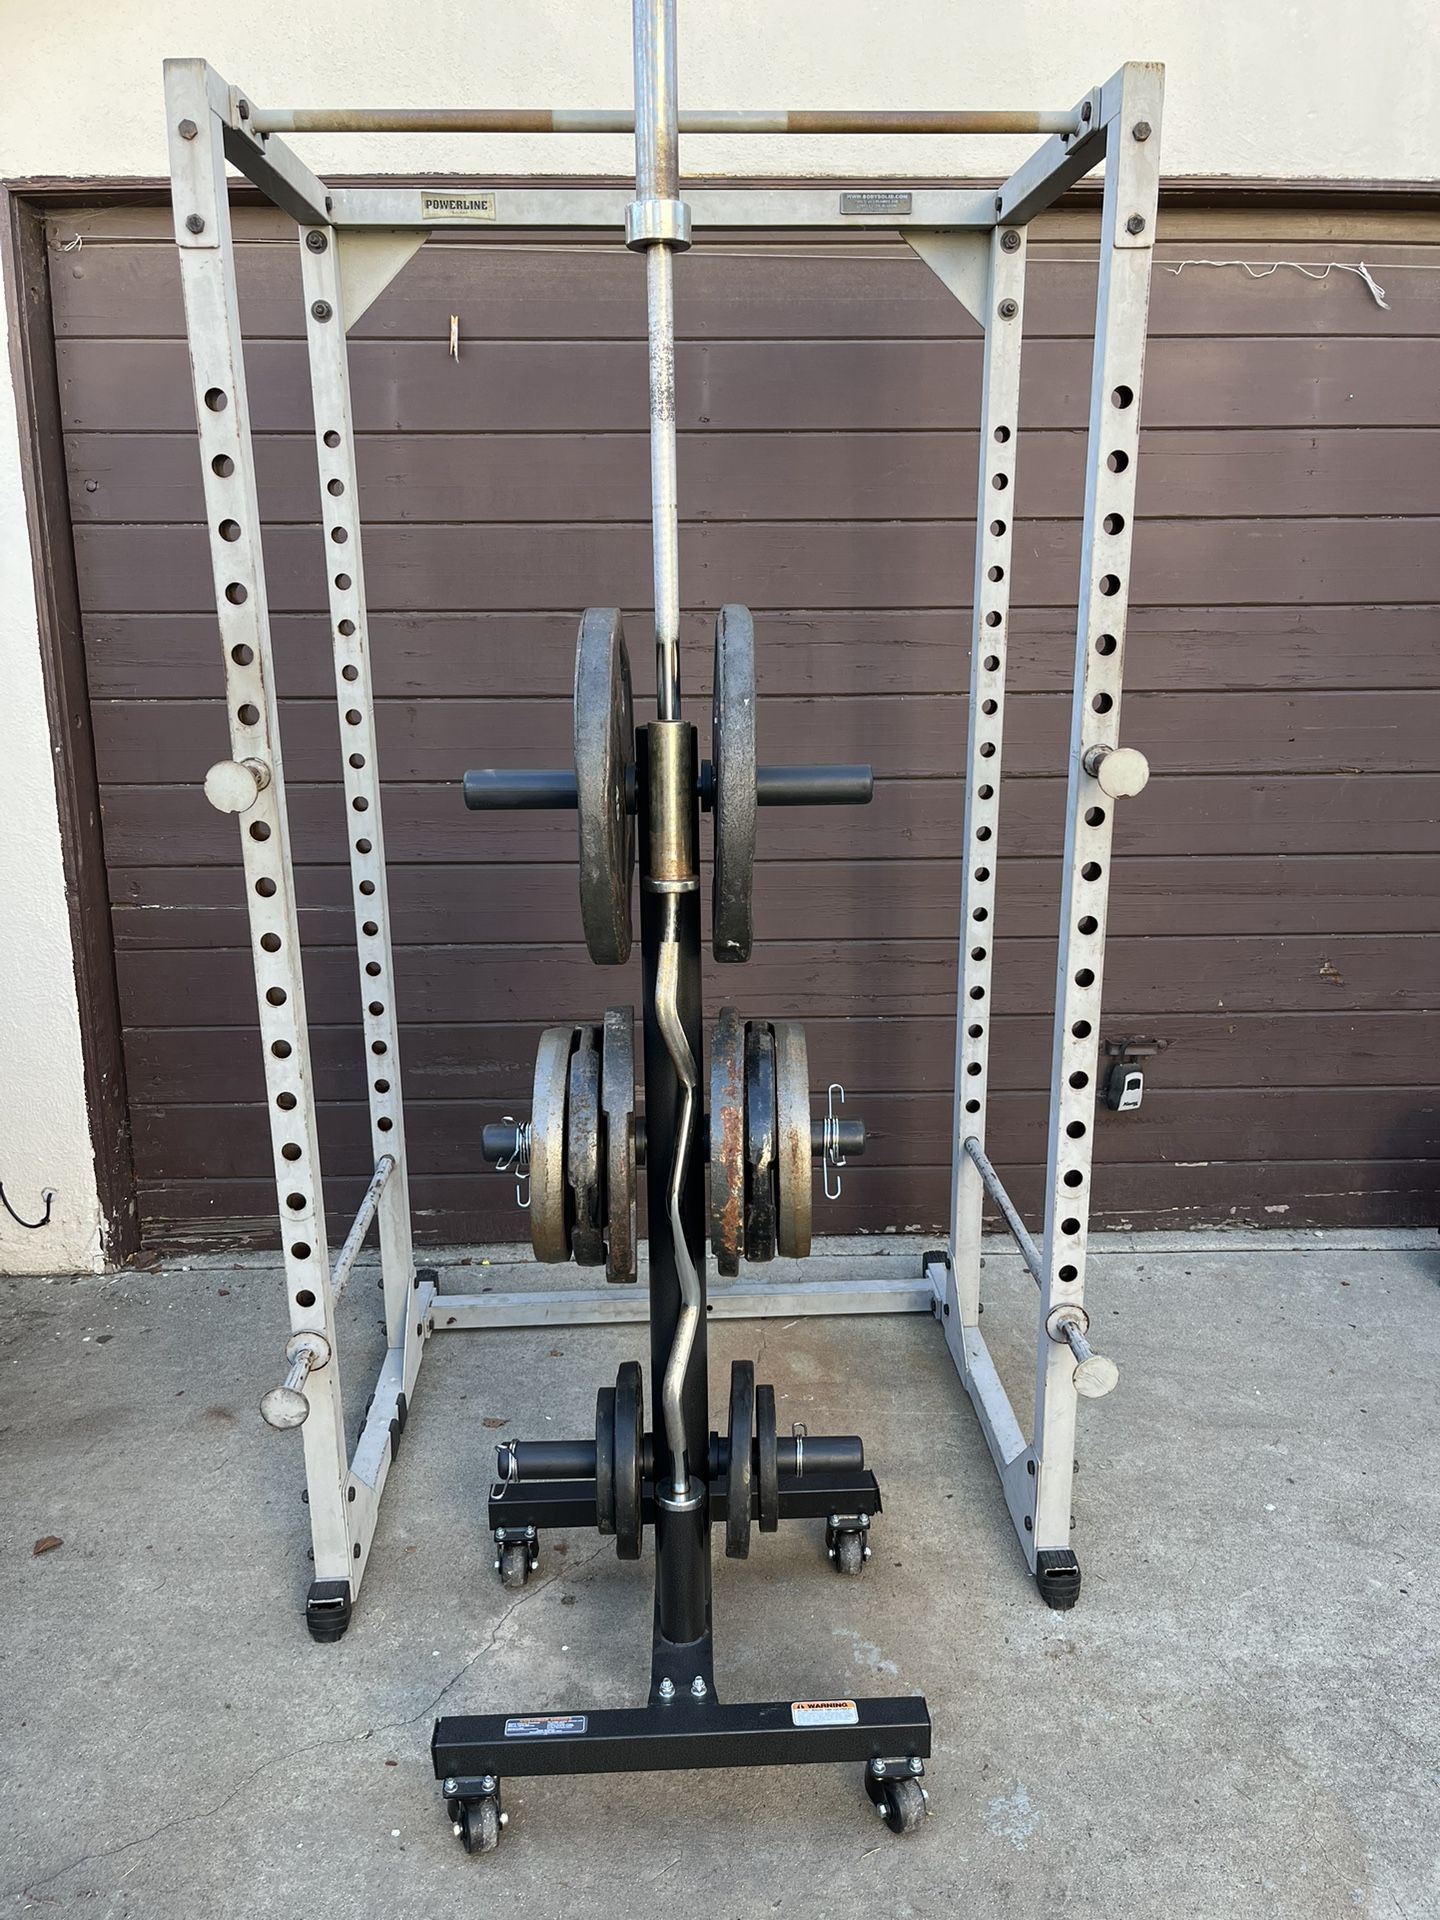 Squat Rack, Olympic Barbell, Curl bar, 2x 45 35 25 25 10 5 Rep Fitness Weight Tree 